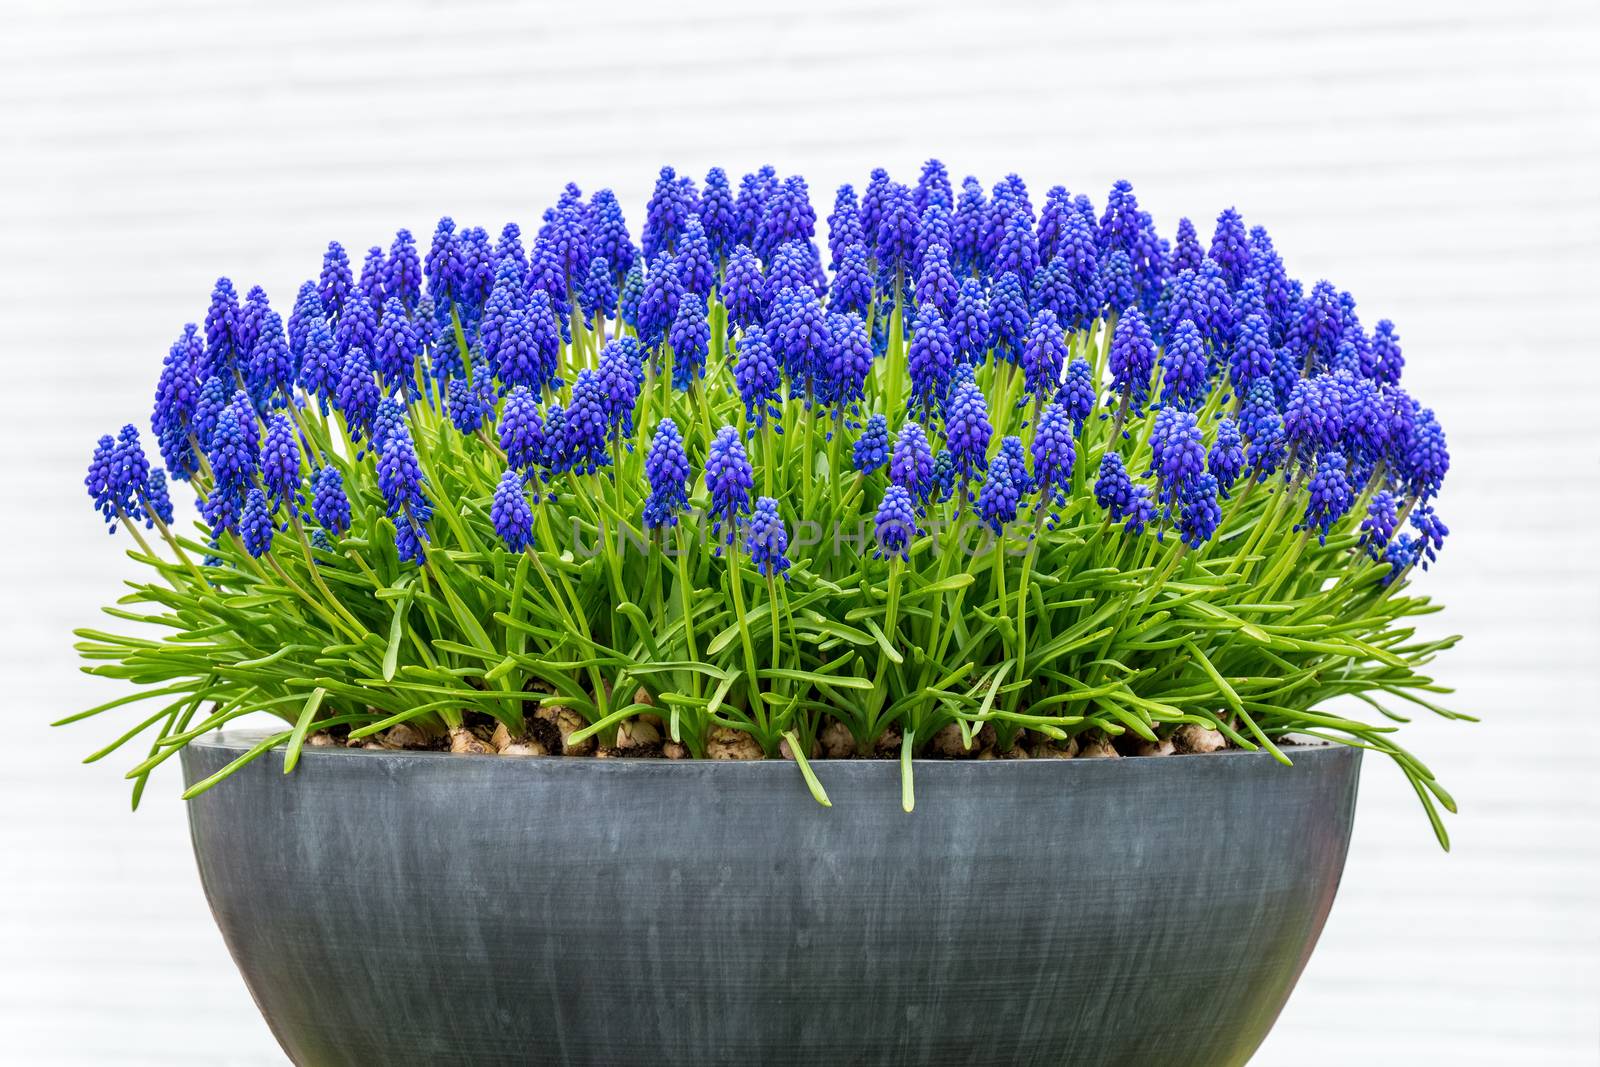 Grey metal flower box with blue grape hyacinths by BenSchonewille